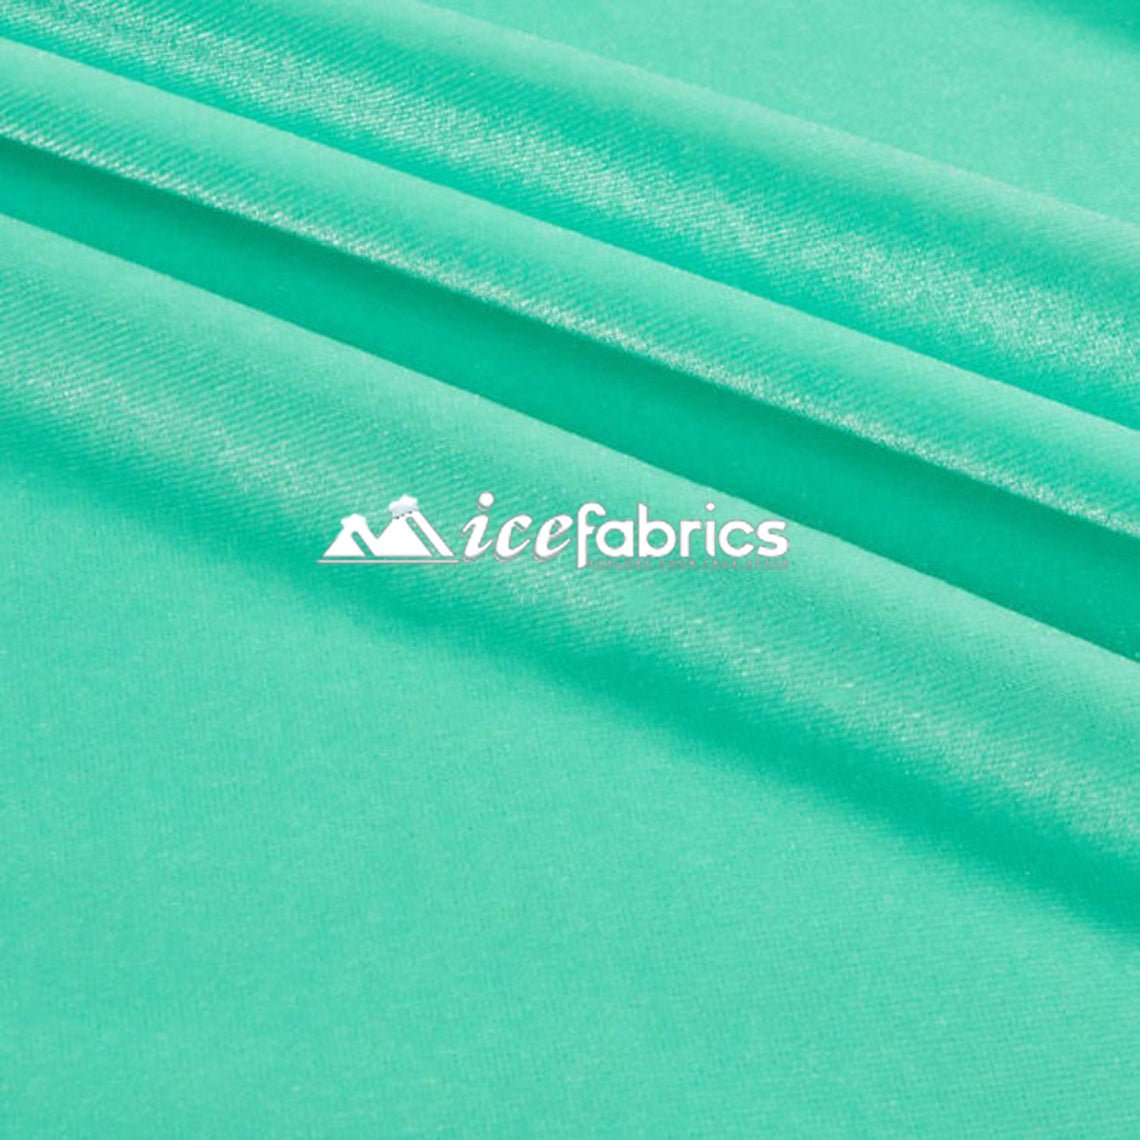 Mint Velvet Fabric By The Yard | 4 Way StretchVelvet FabricICE FABRICSICE FABRICSBy The Yard (58" Wide)Mint Velvet Fabric By The Yard | 4 Way Stretch ICE FABRICS